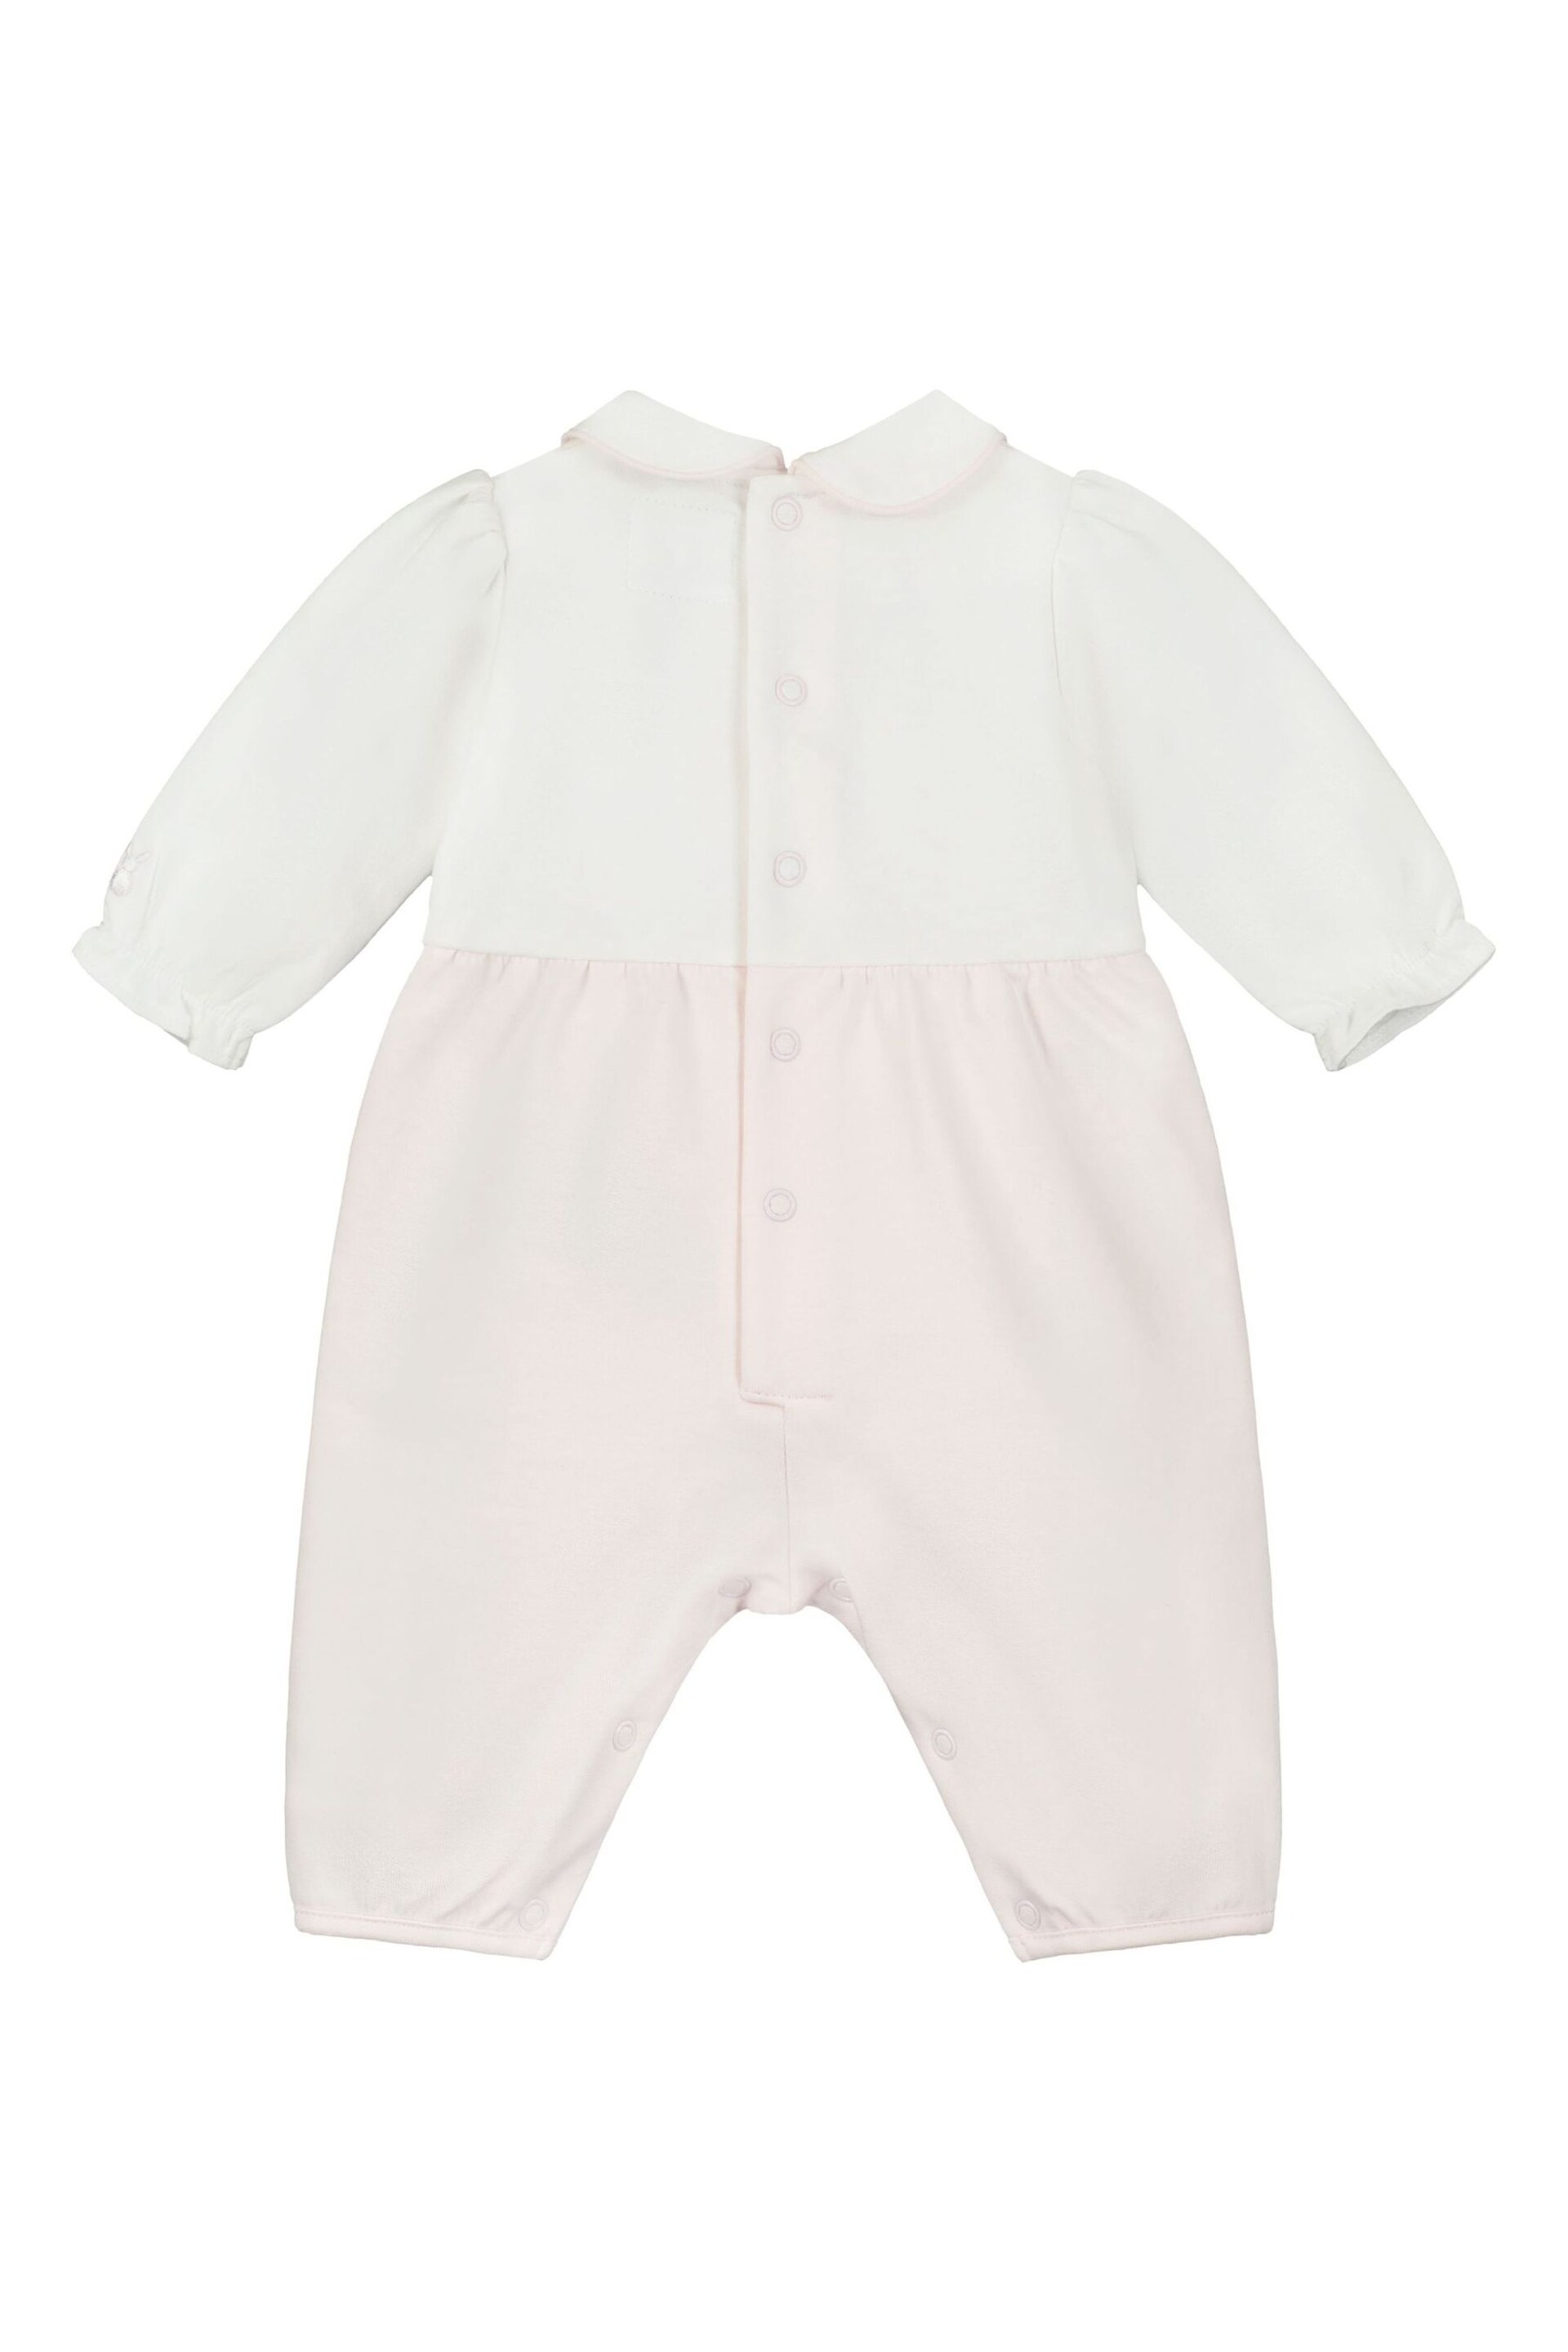 Emile et Rose Pink All In One with emb pleats, Pink lower & H/B - Image 4 of 5